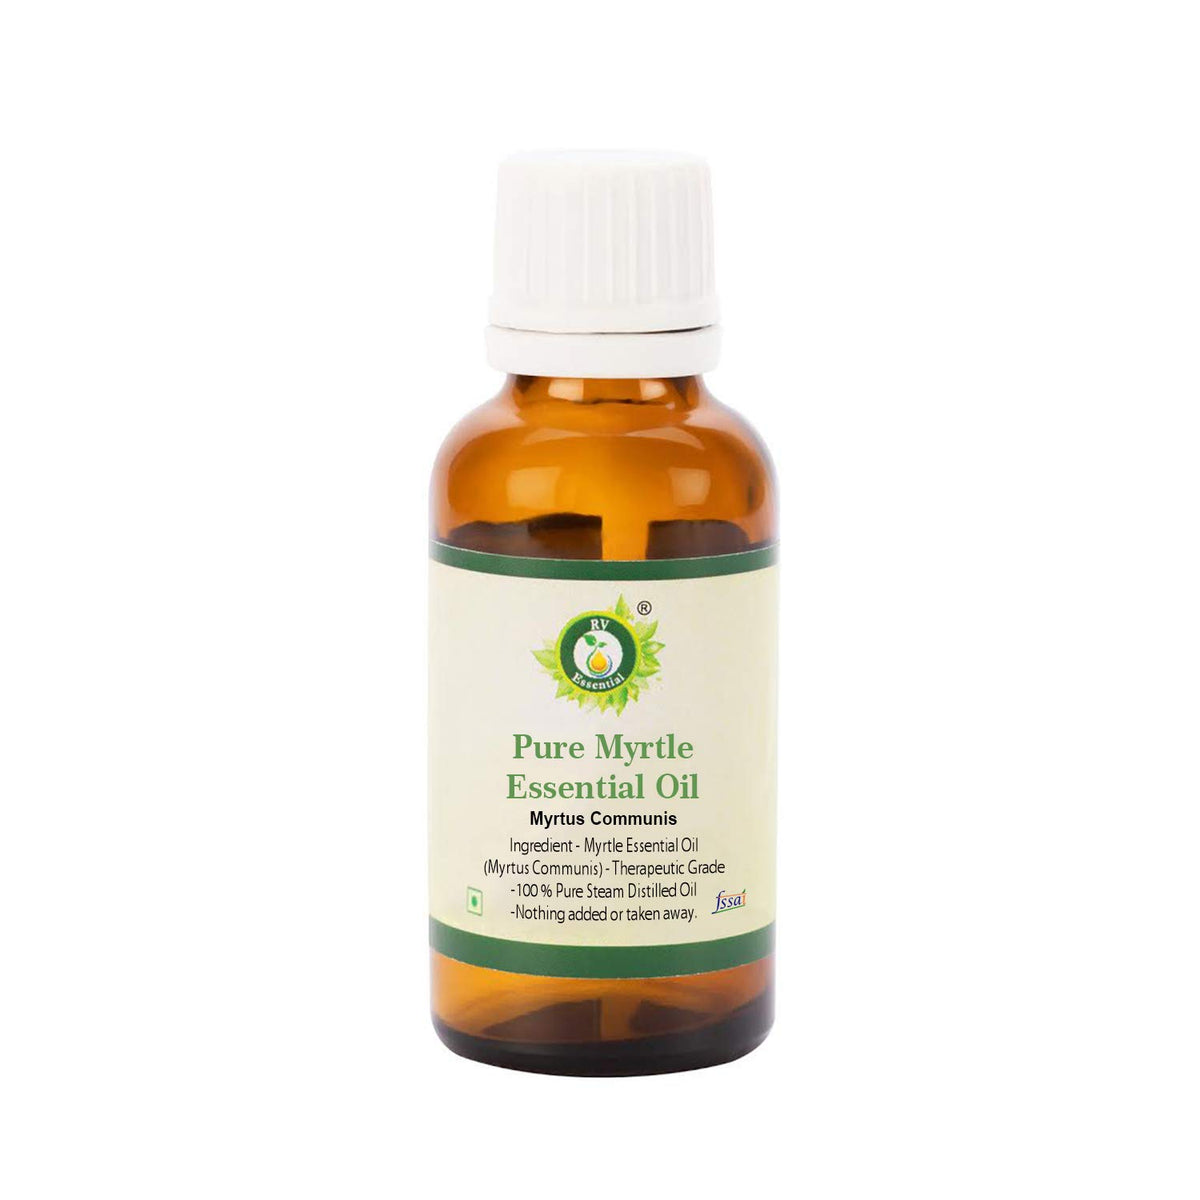 Myrtle Essential Oil | Myrtus Communis | Myrtle Oil | For Skin | Undiluted | 100% Pure Natural | Steam Distilled | Therapeutic Grade | 30ml | 1.01oz By R V Essential